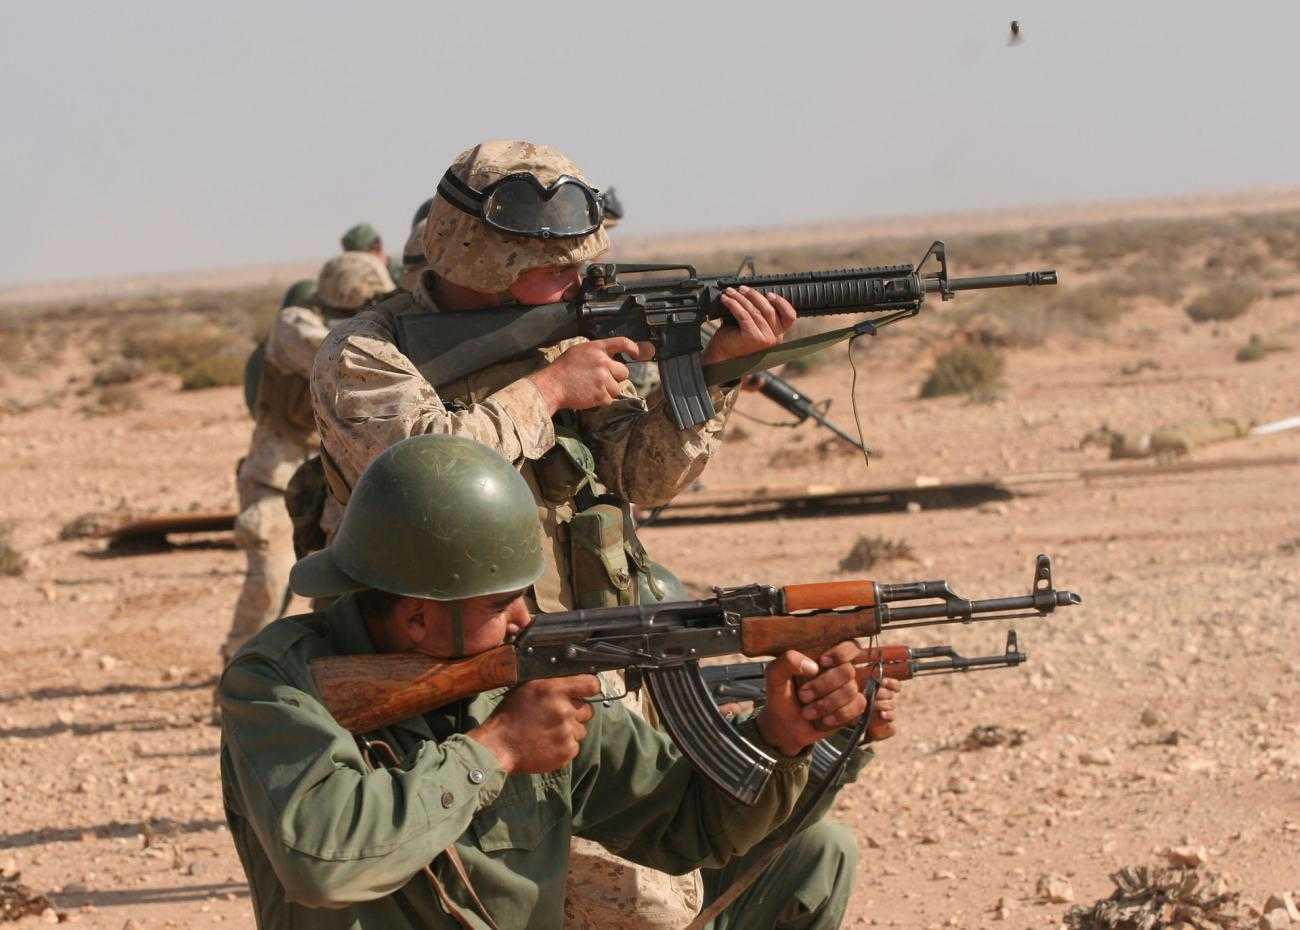 Moroccan and U.S. soldiers exercising together as part of a joint military exercise in March, 2007 / Photo: Wikimedia Commons